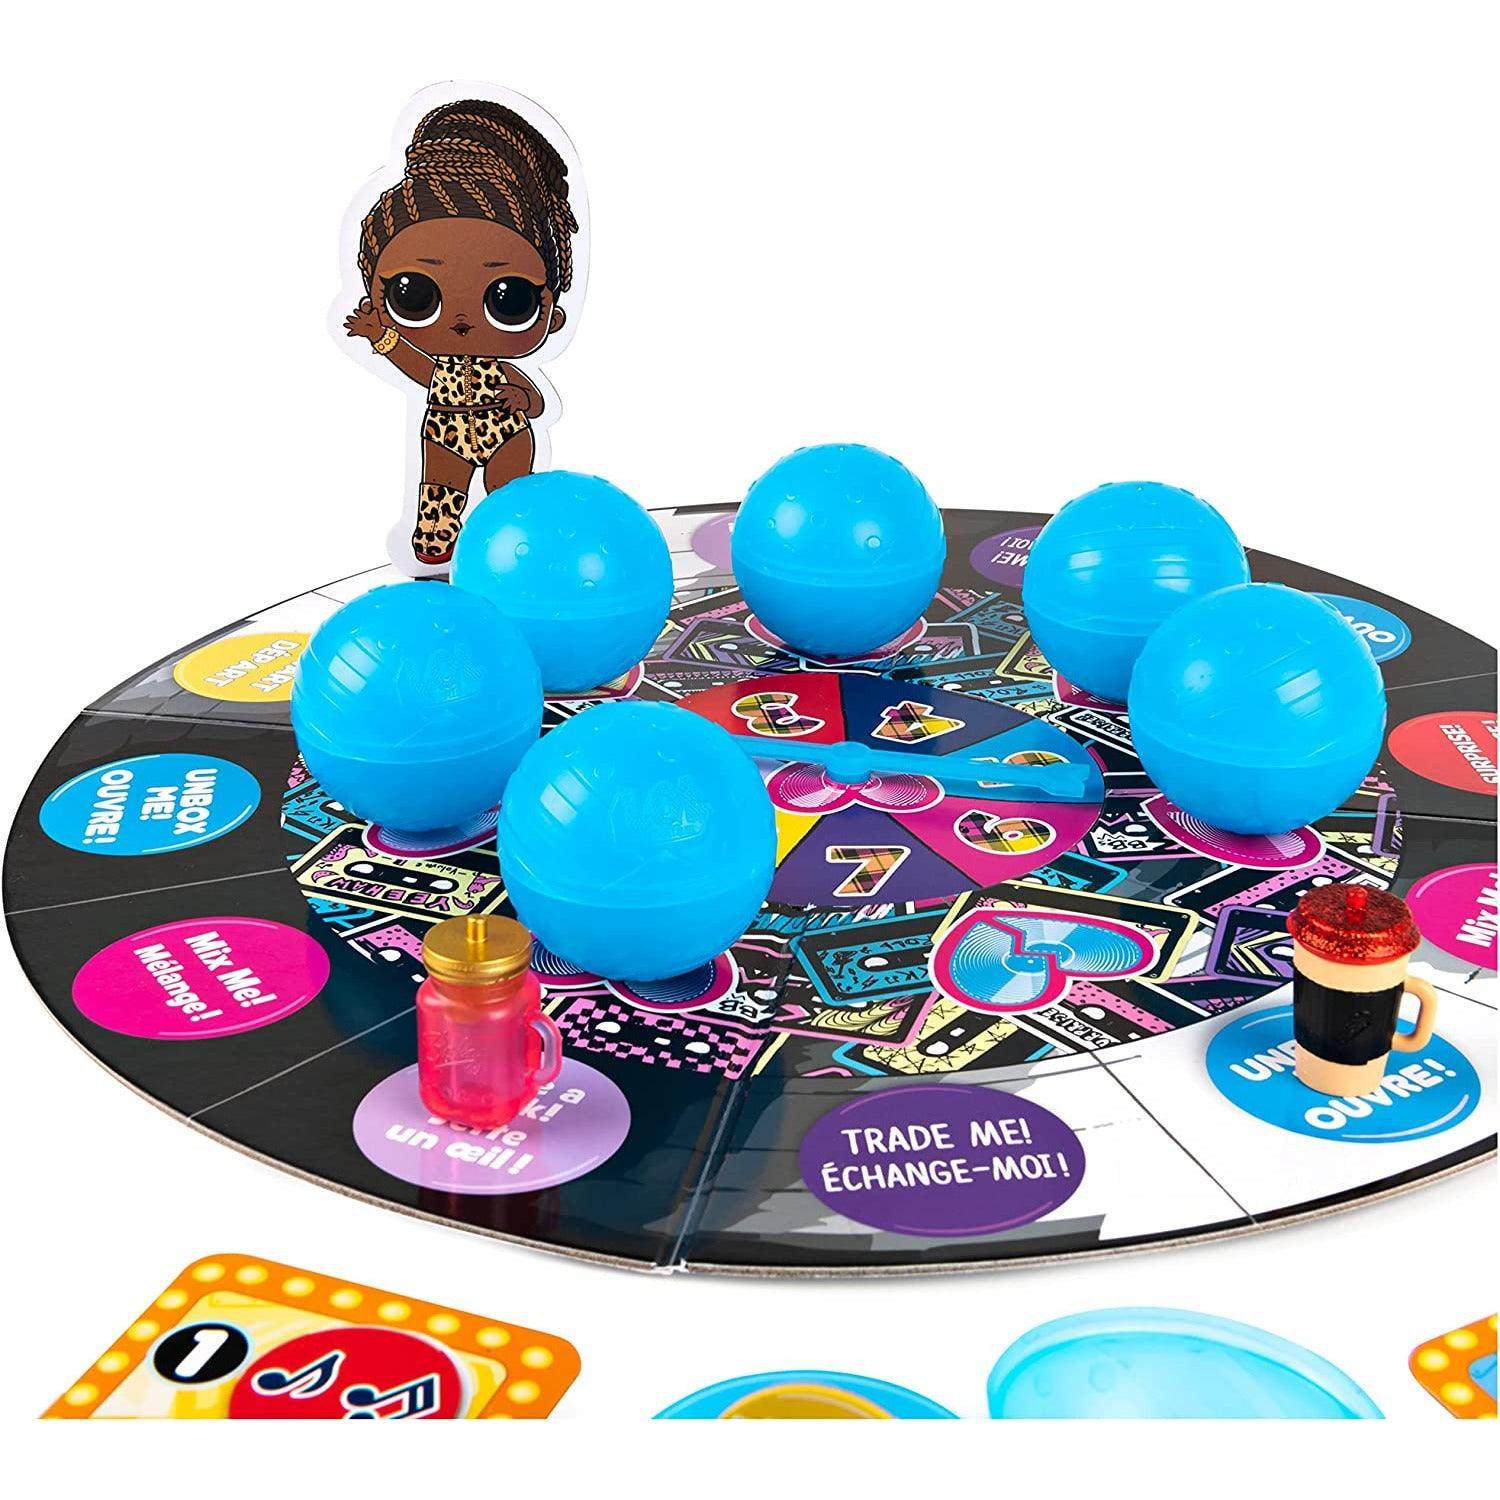 L.O.L Surprise! Remix 7 Layers of Fun Board Game, for Families and Kids - BumbleToys - 5-7 Years, 8-13 Years, Dolls, Girls, Roleplay, Toy Land